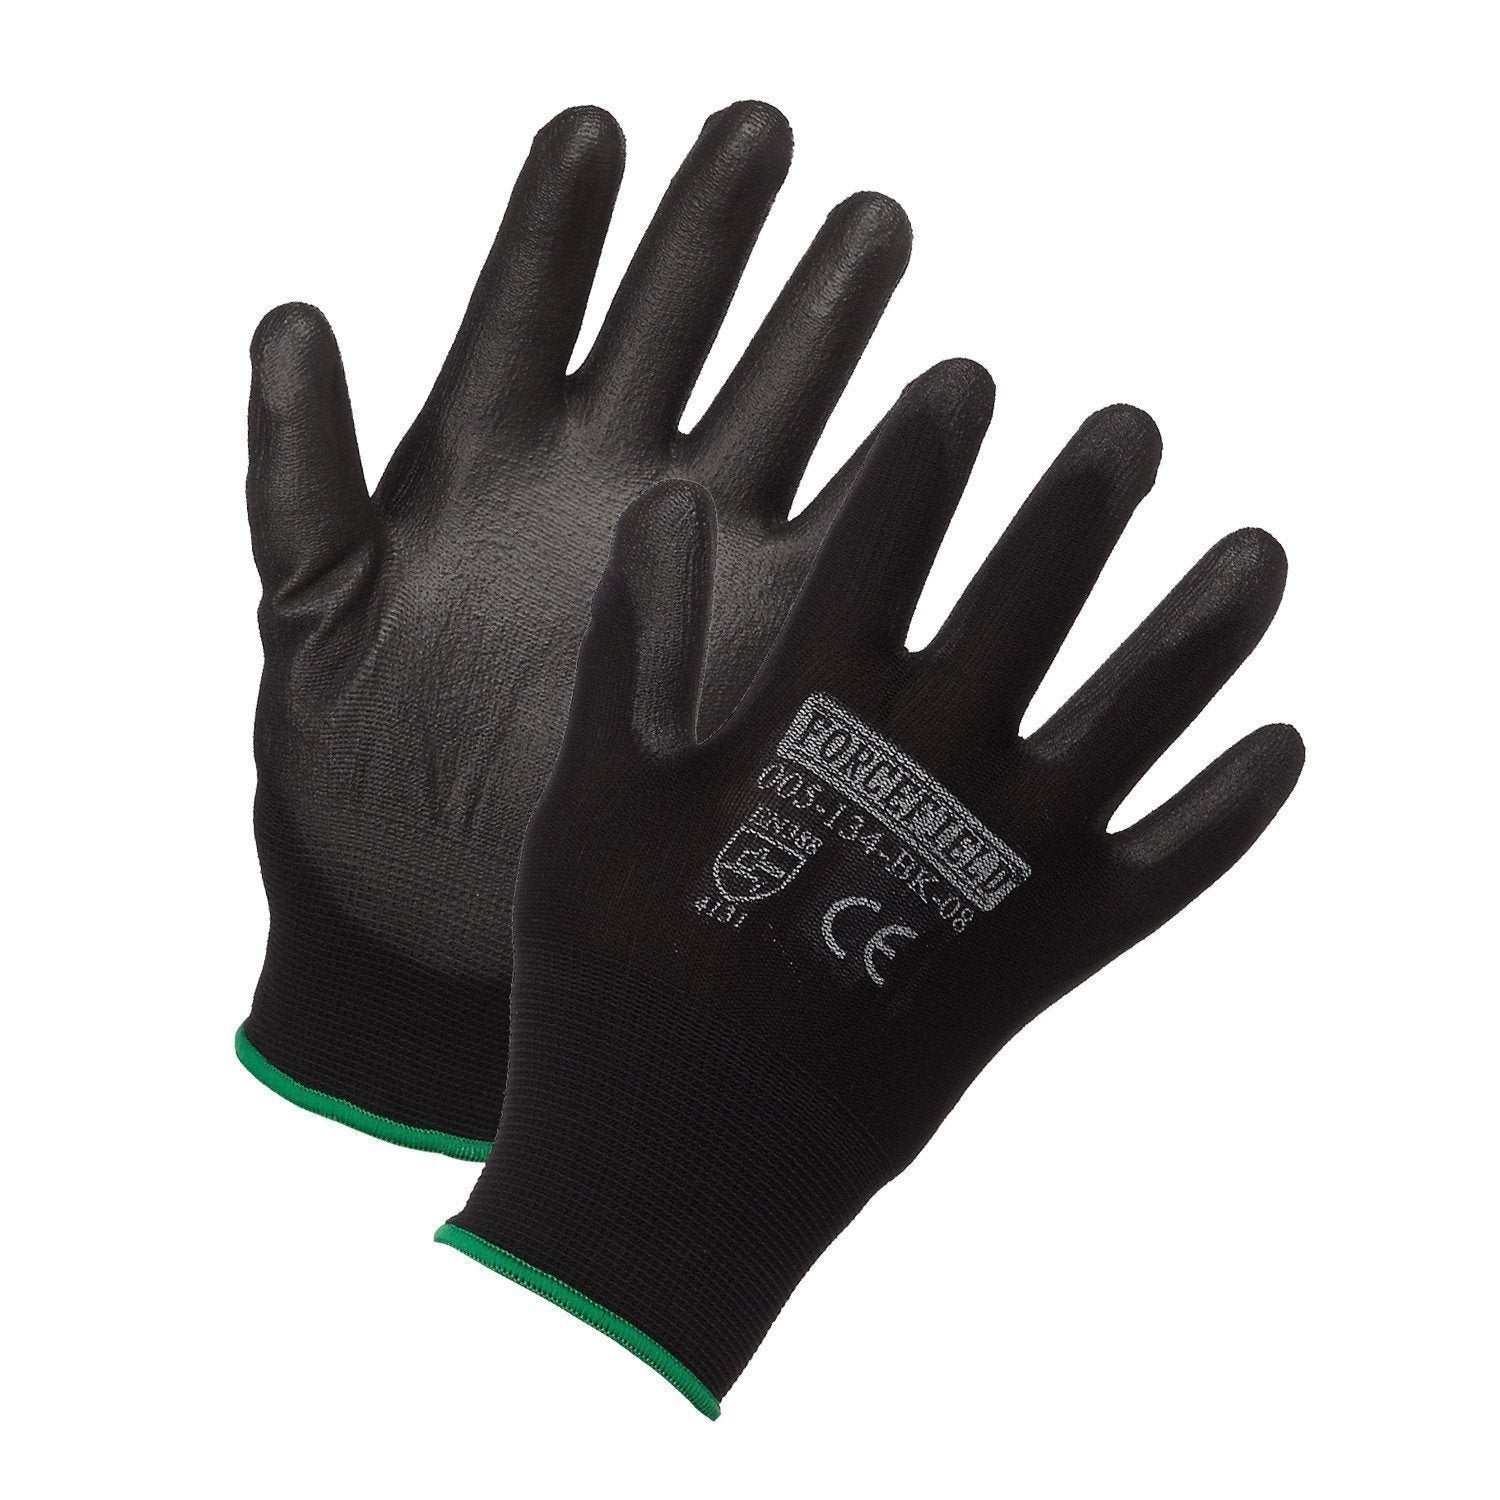 Grey HPPE Cut Resistant Glove, Polyurethane Palm Coated, XS